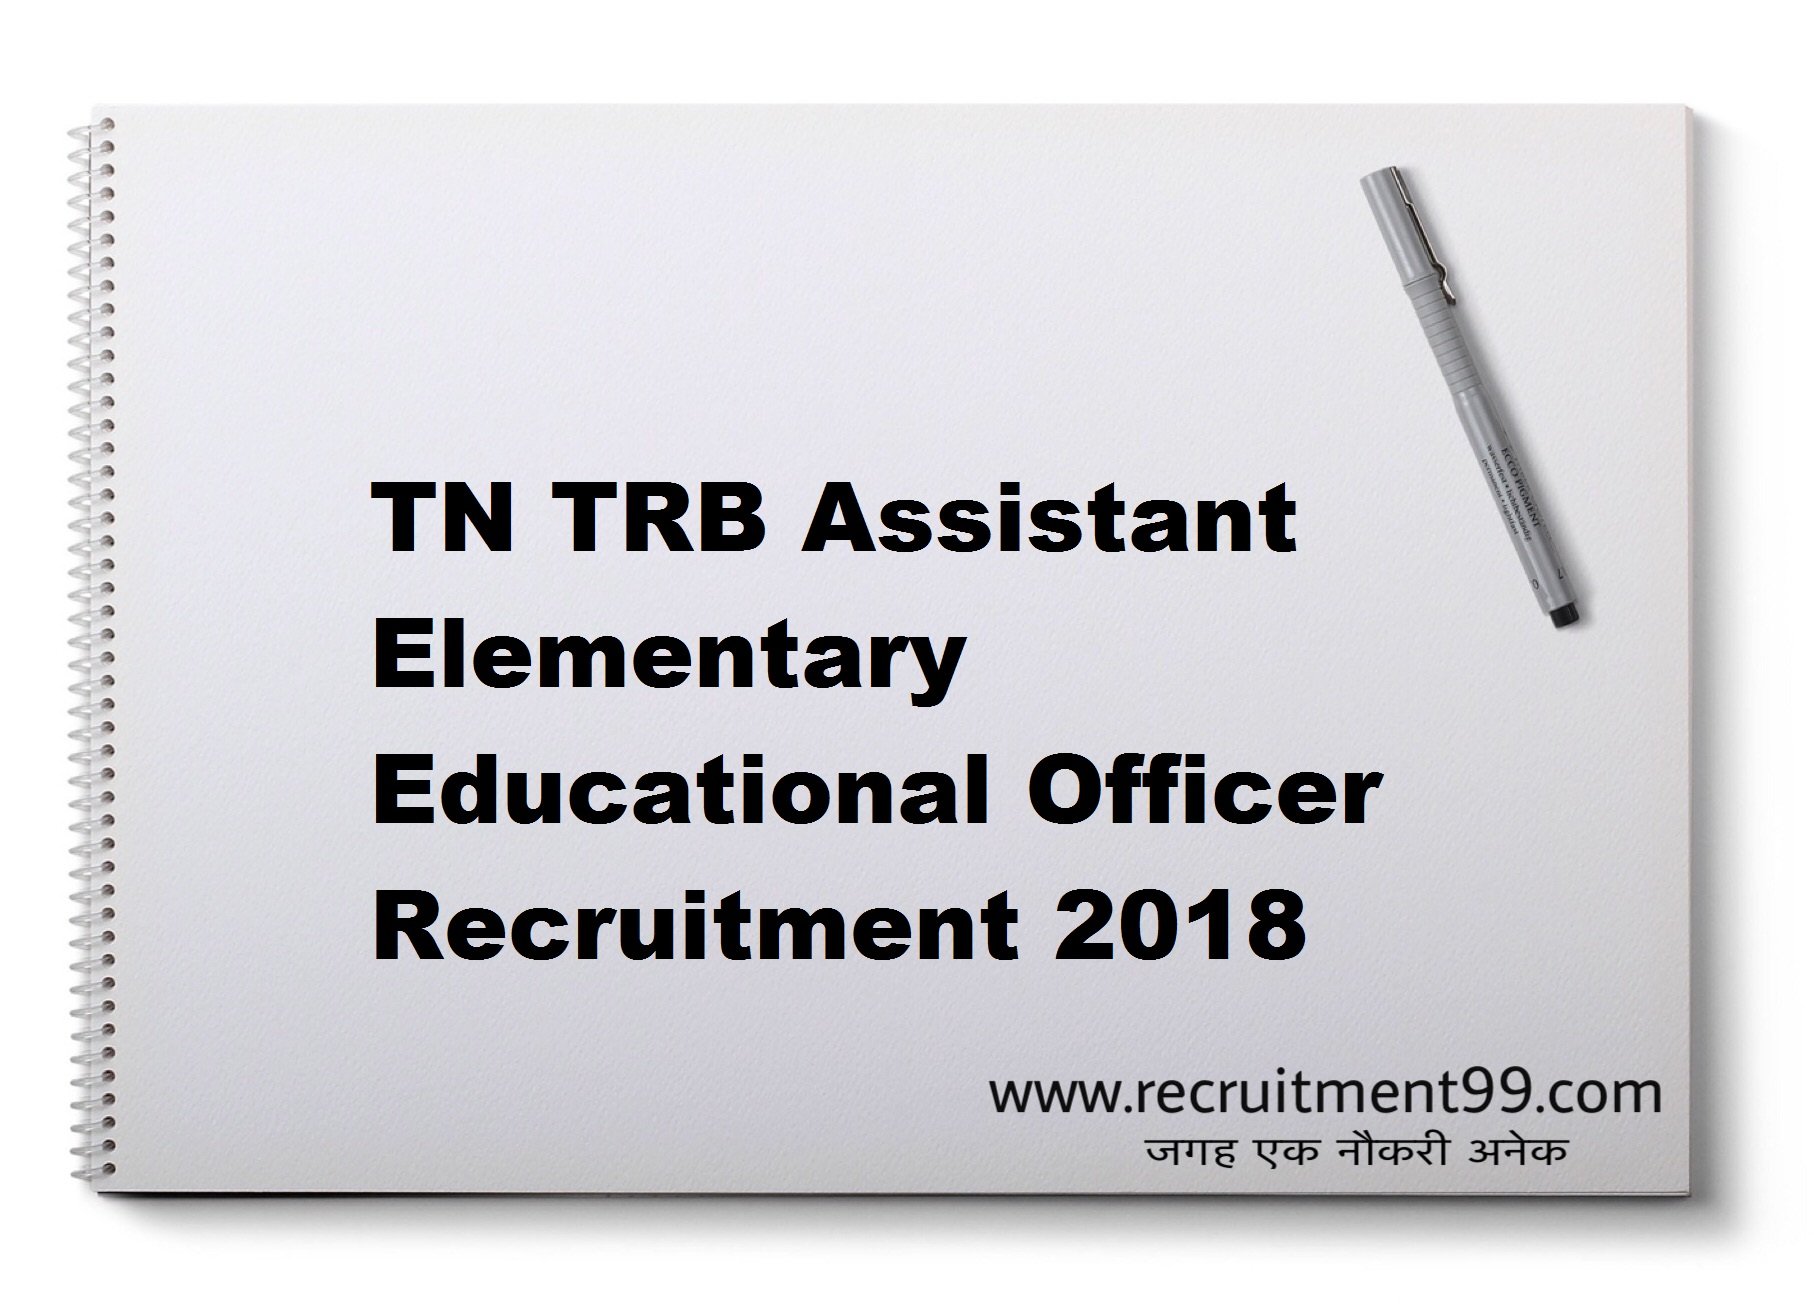 TN TRB Assistant Elementary Educational Officer Recruitment Hall Ticket Result 2018